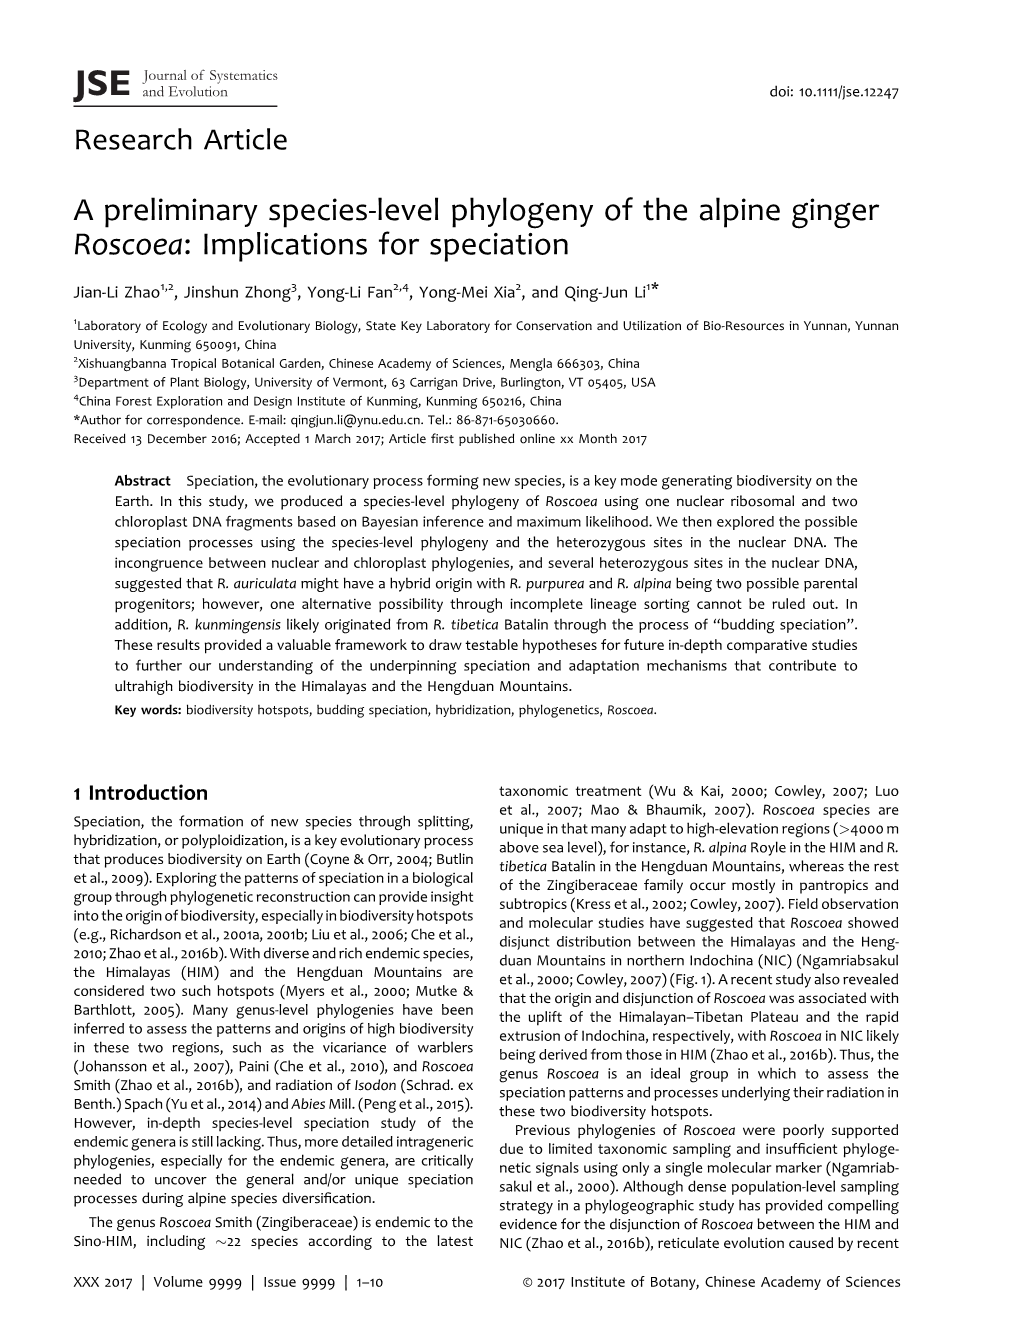 A Preliminary Species-Level Phylogeny of the Alpine Ginger Roscoea: Implications for Speciation